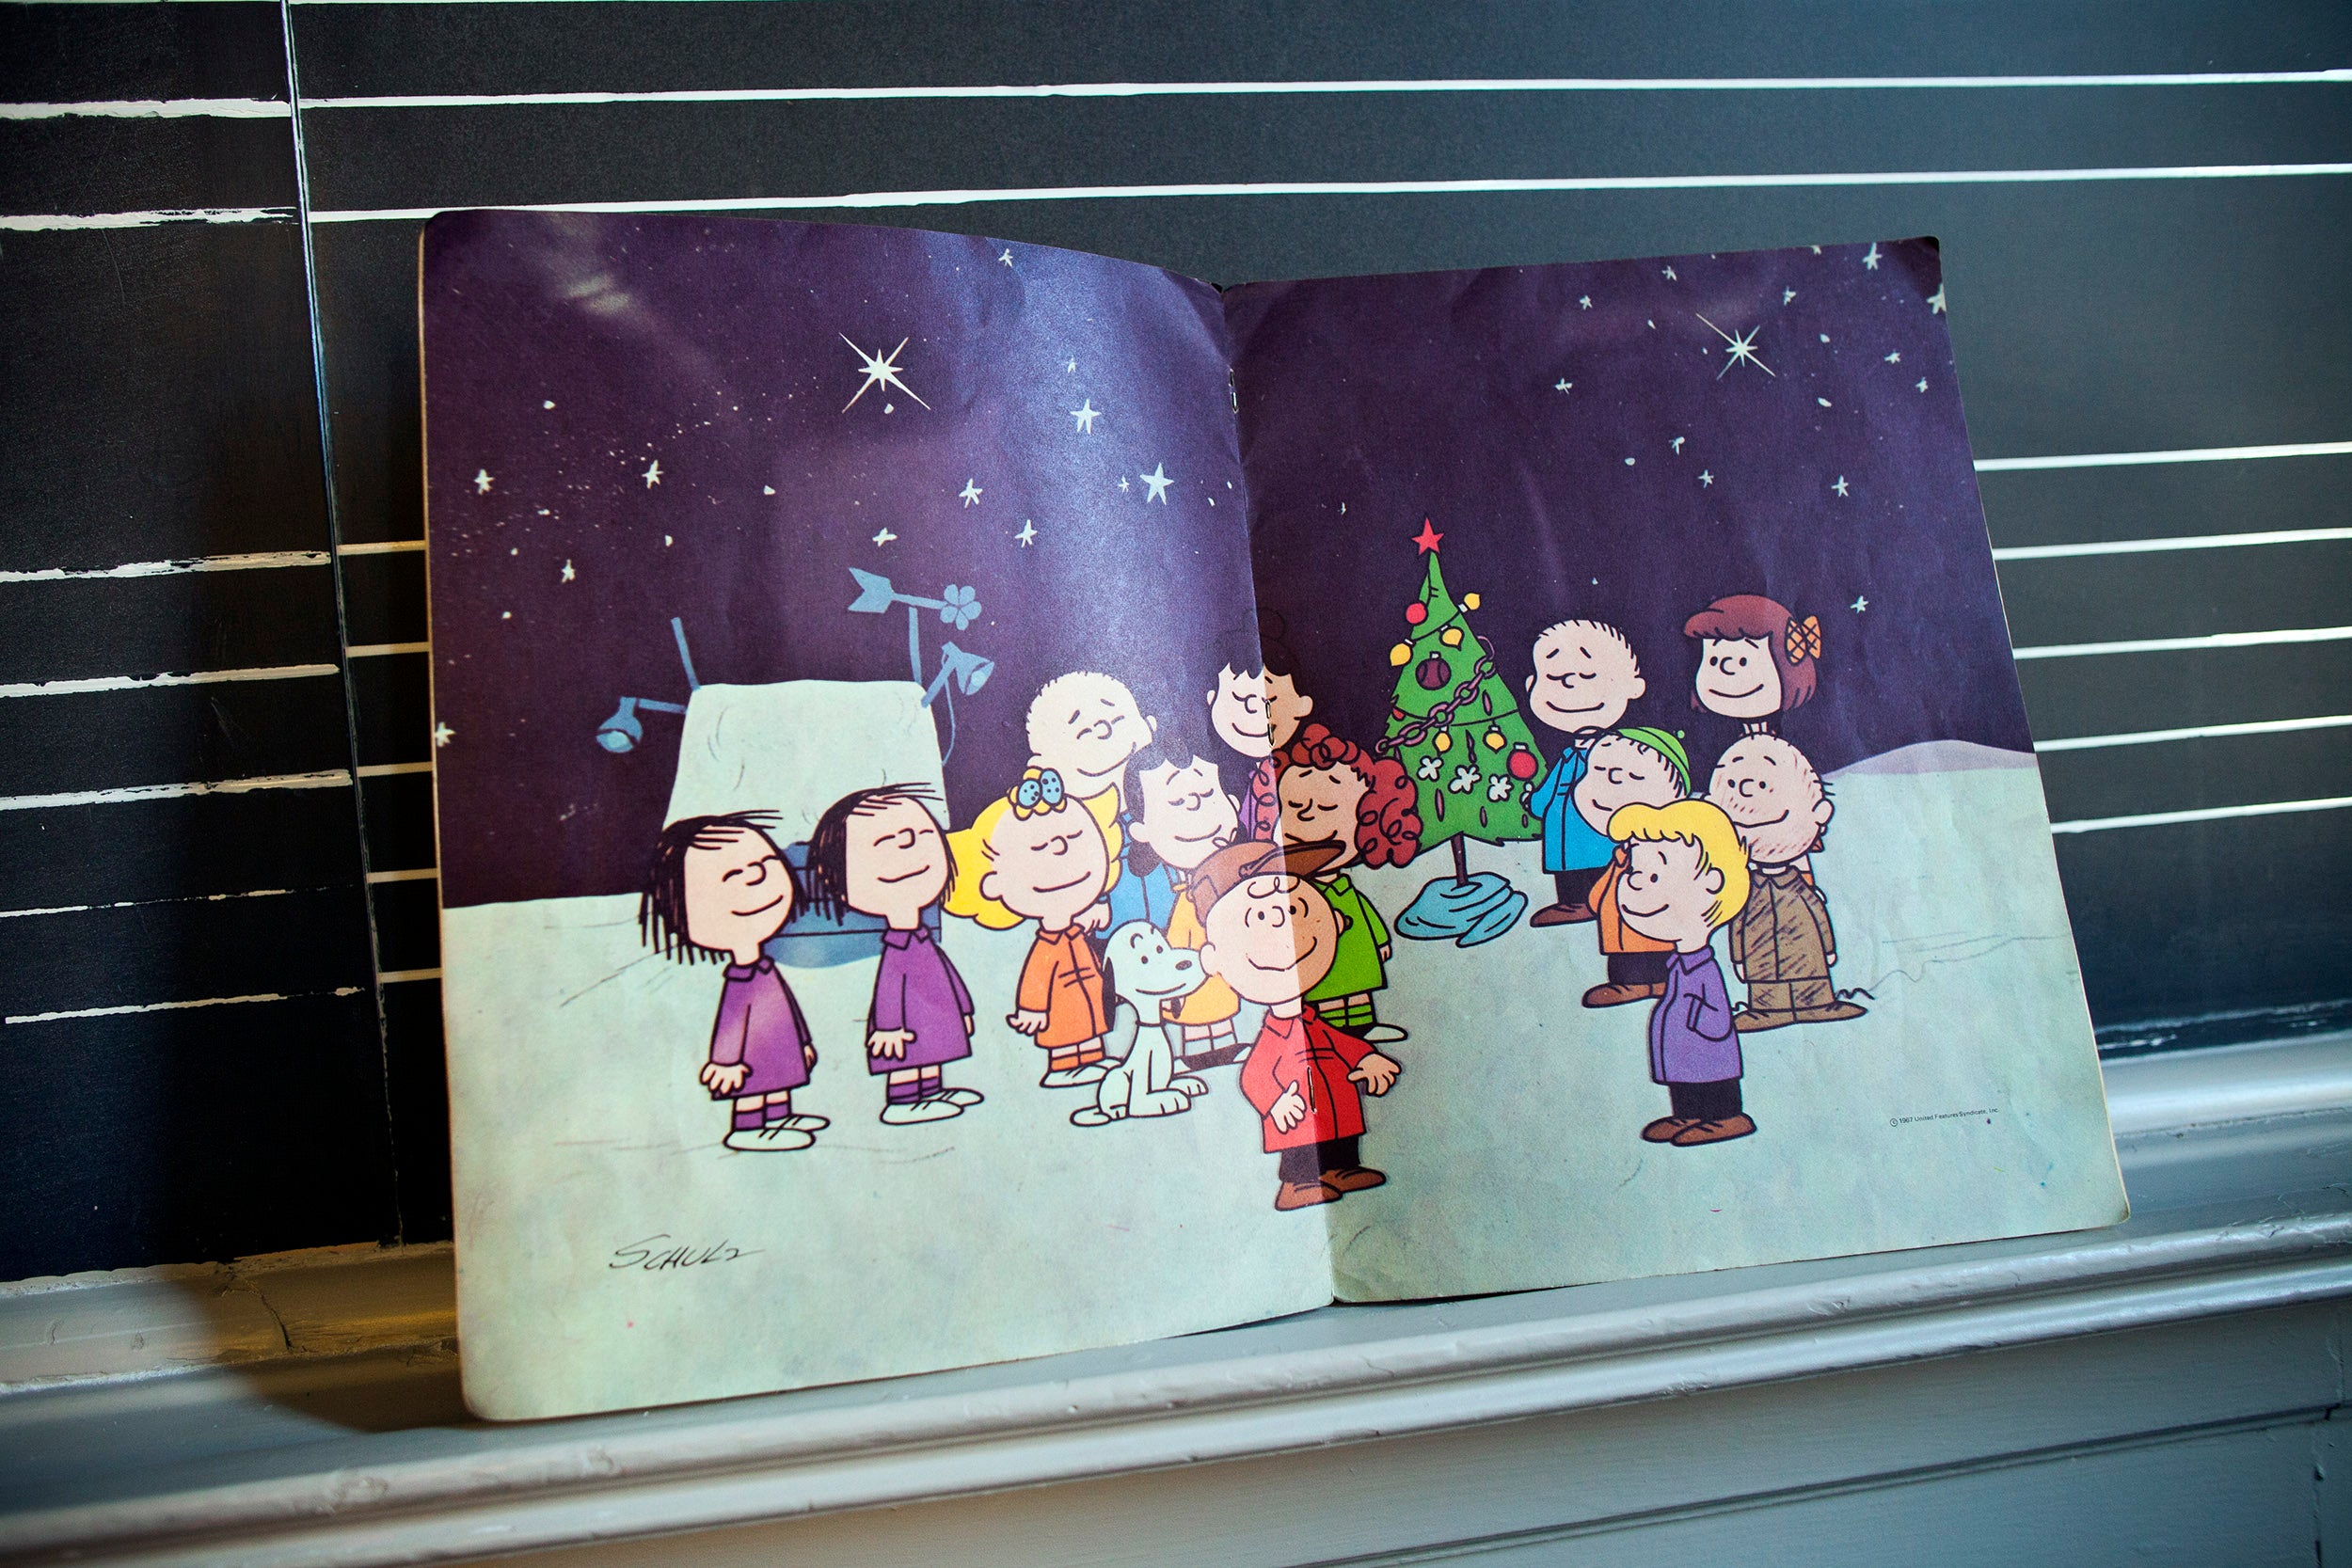 Detail of Vince Guaraldi's sheet music illustrated with "Peanuts" characters.